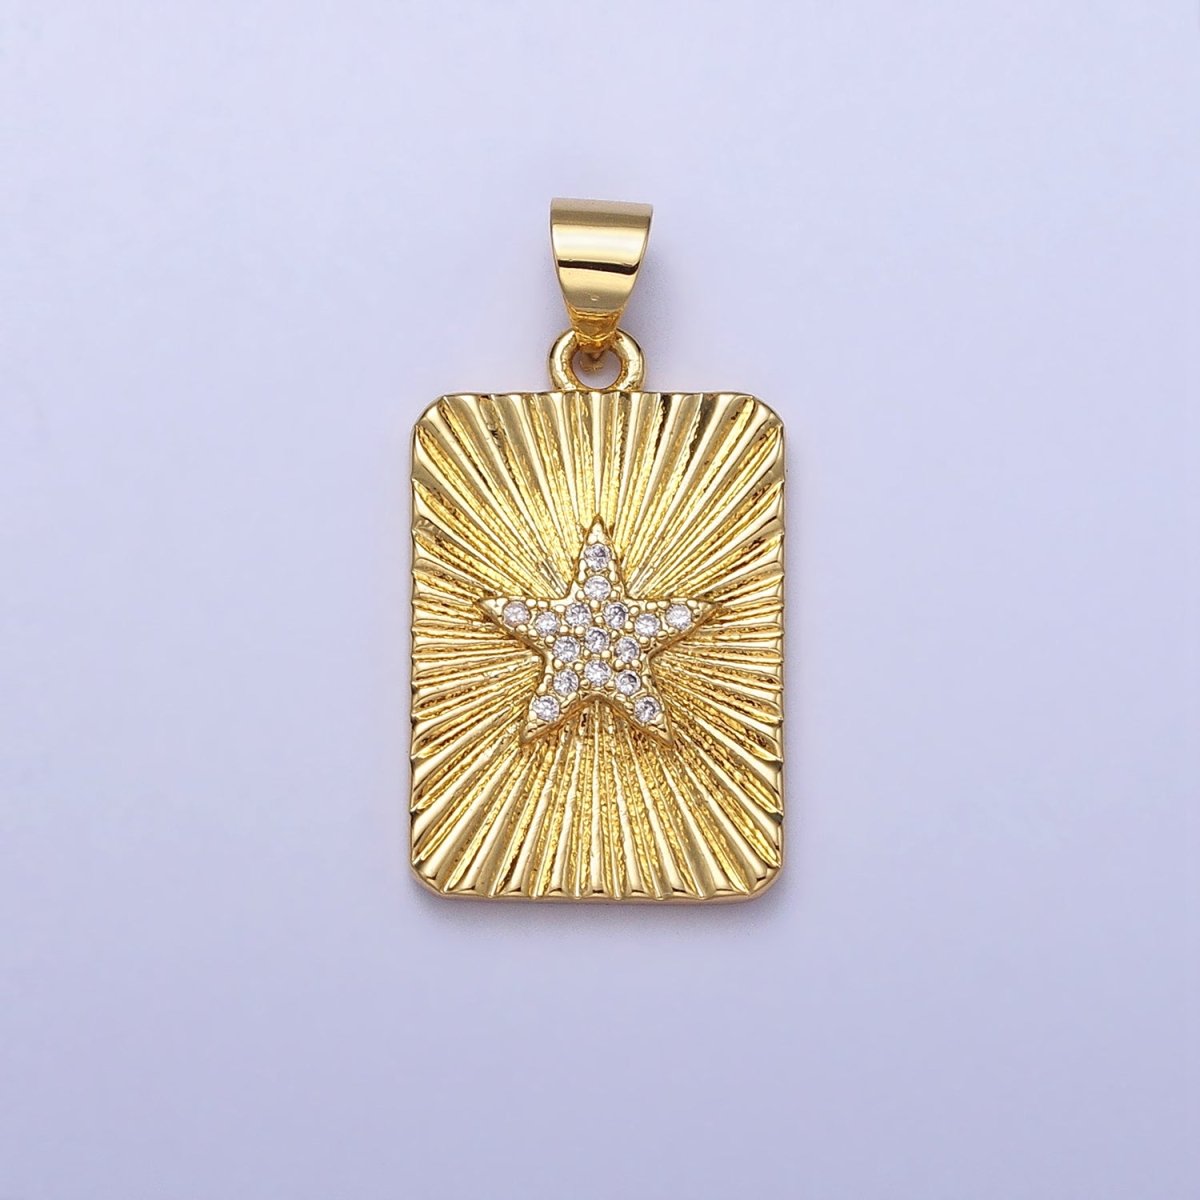 24K Gold Filled Star Celestial Clear CZ Micro Paved Sunburst Textured Tag Pendant | AA172 - DLUXCA